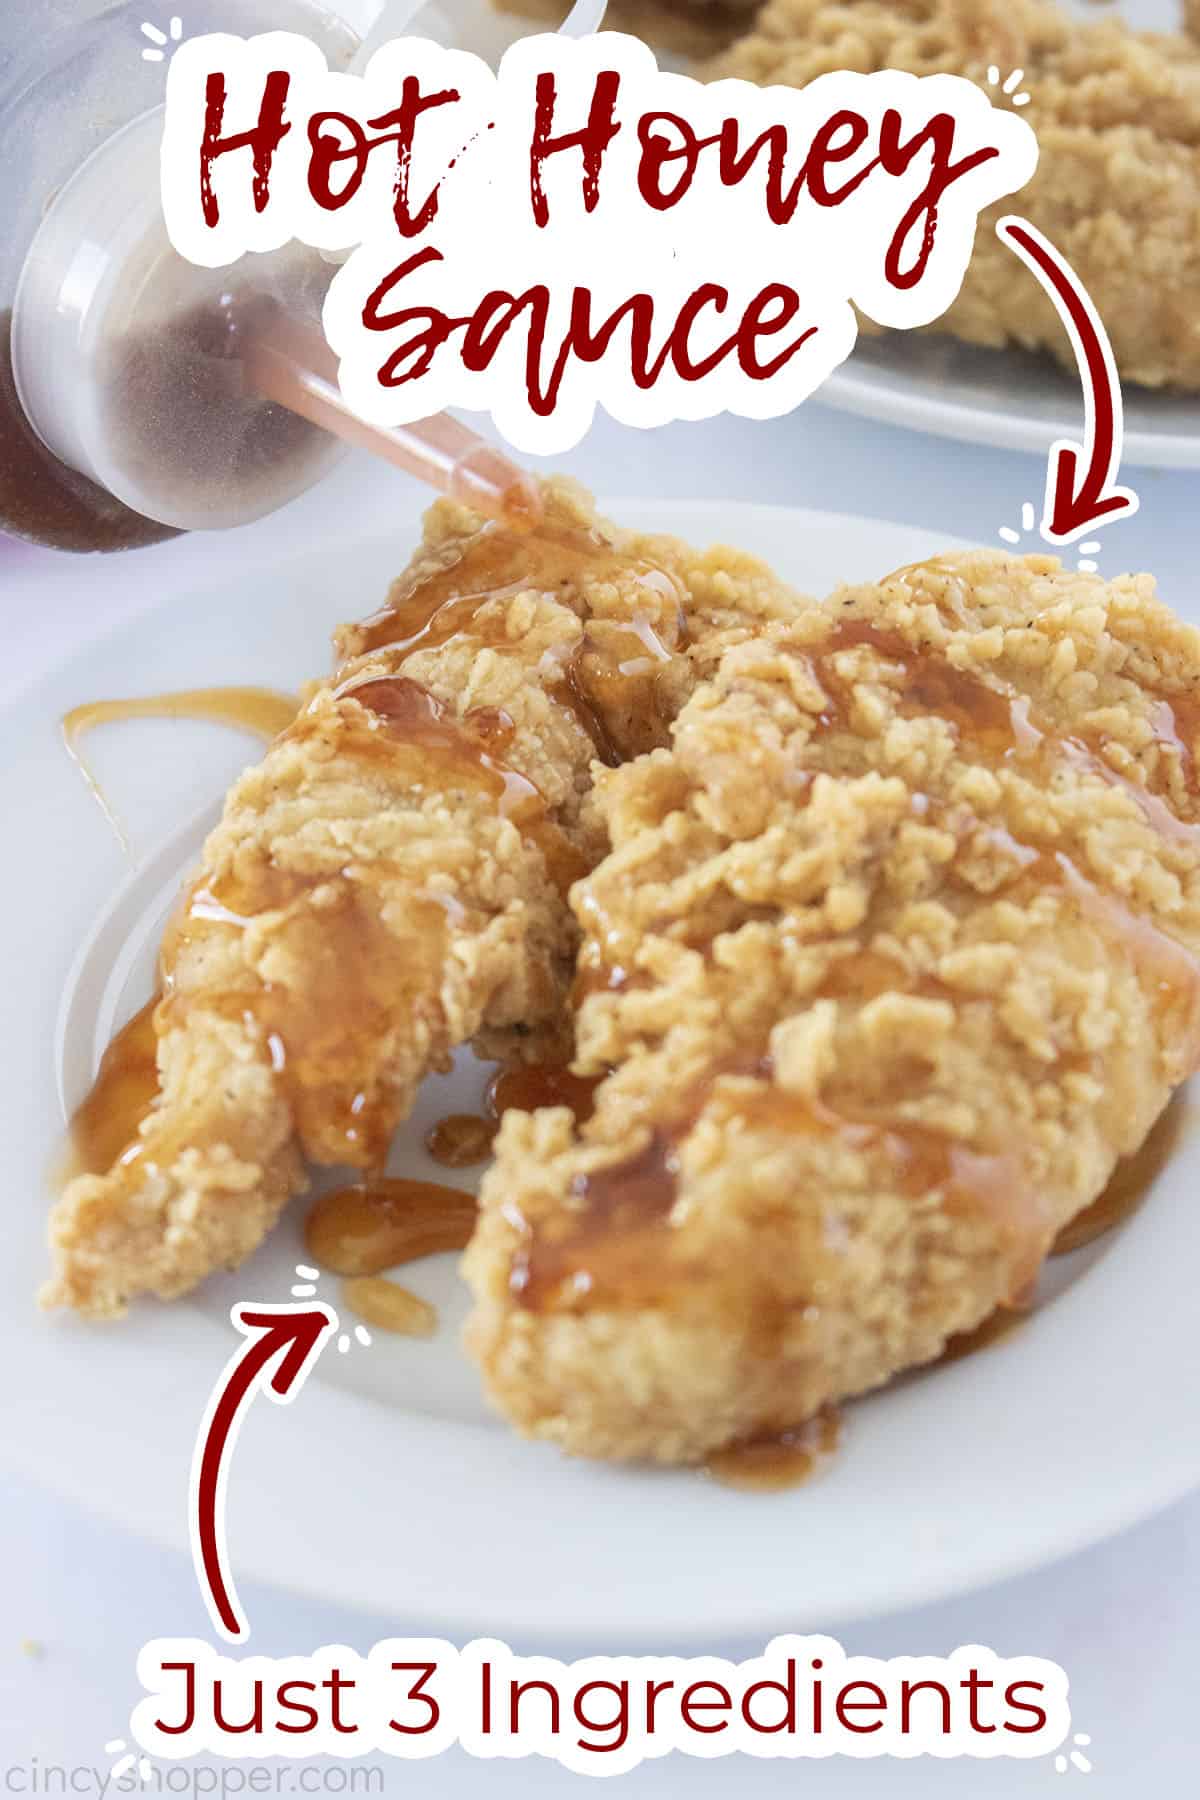 Chicken tenders with text on image Hot Honey Sauce just 3 Ingredients.